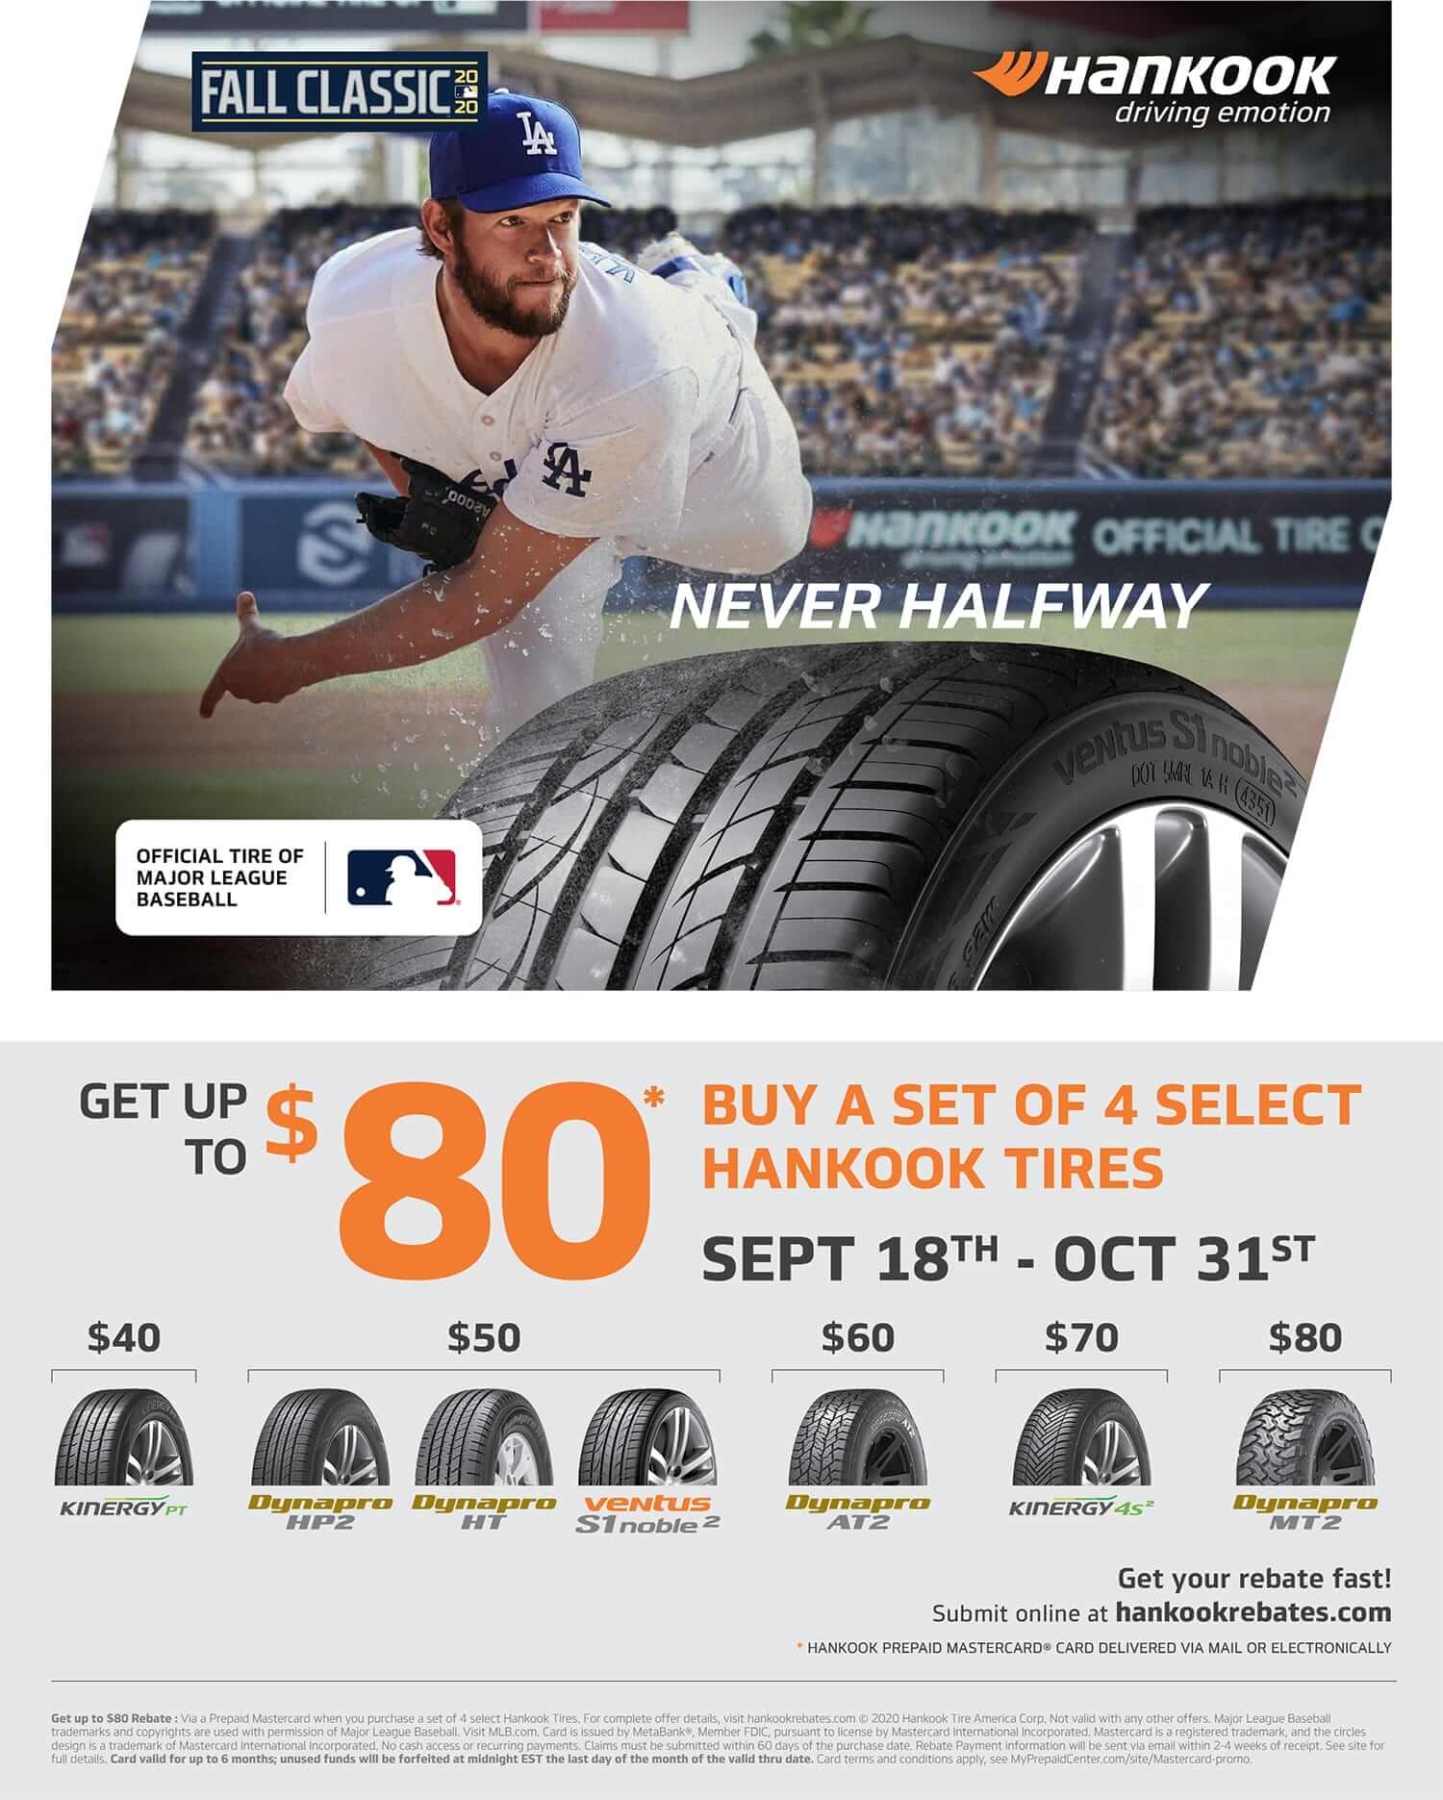 Hankook Tire Offers Savings Of Up To 80 W 2020 Fall Classic Rebate 